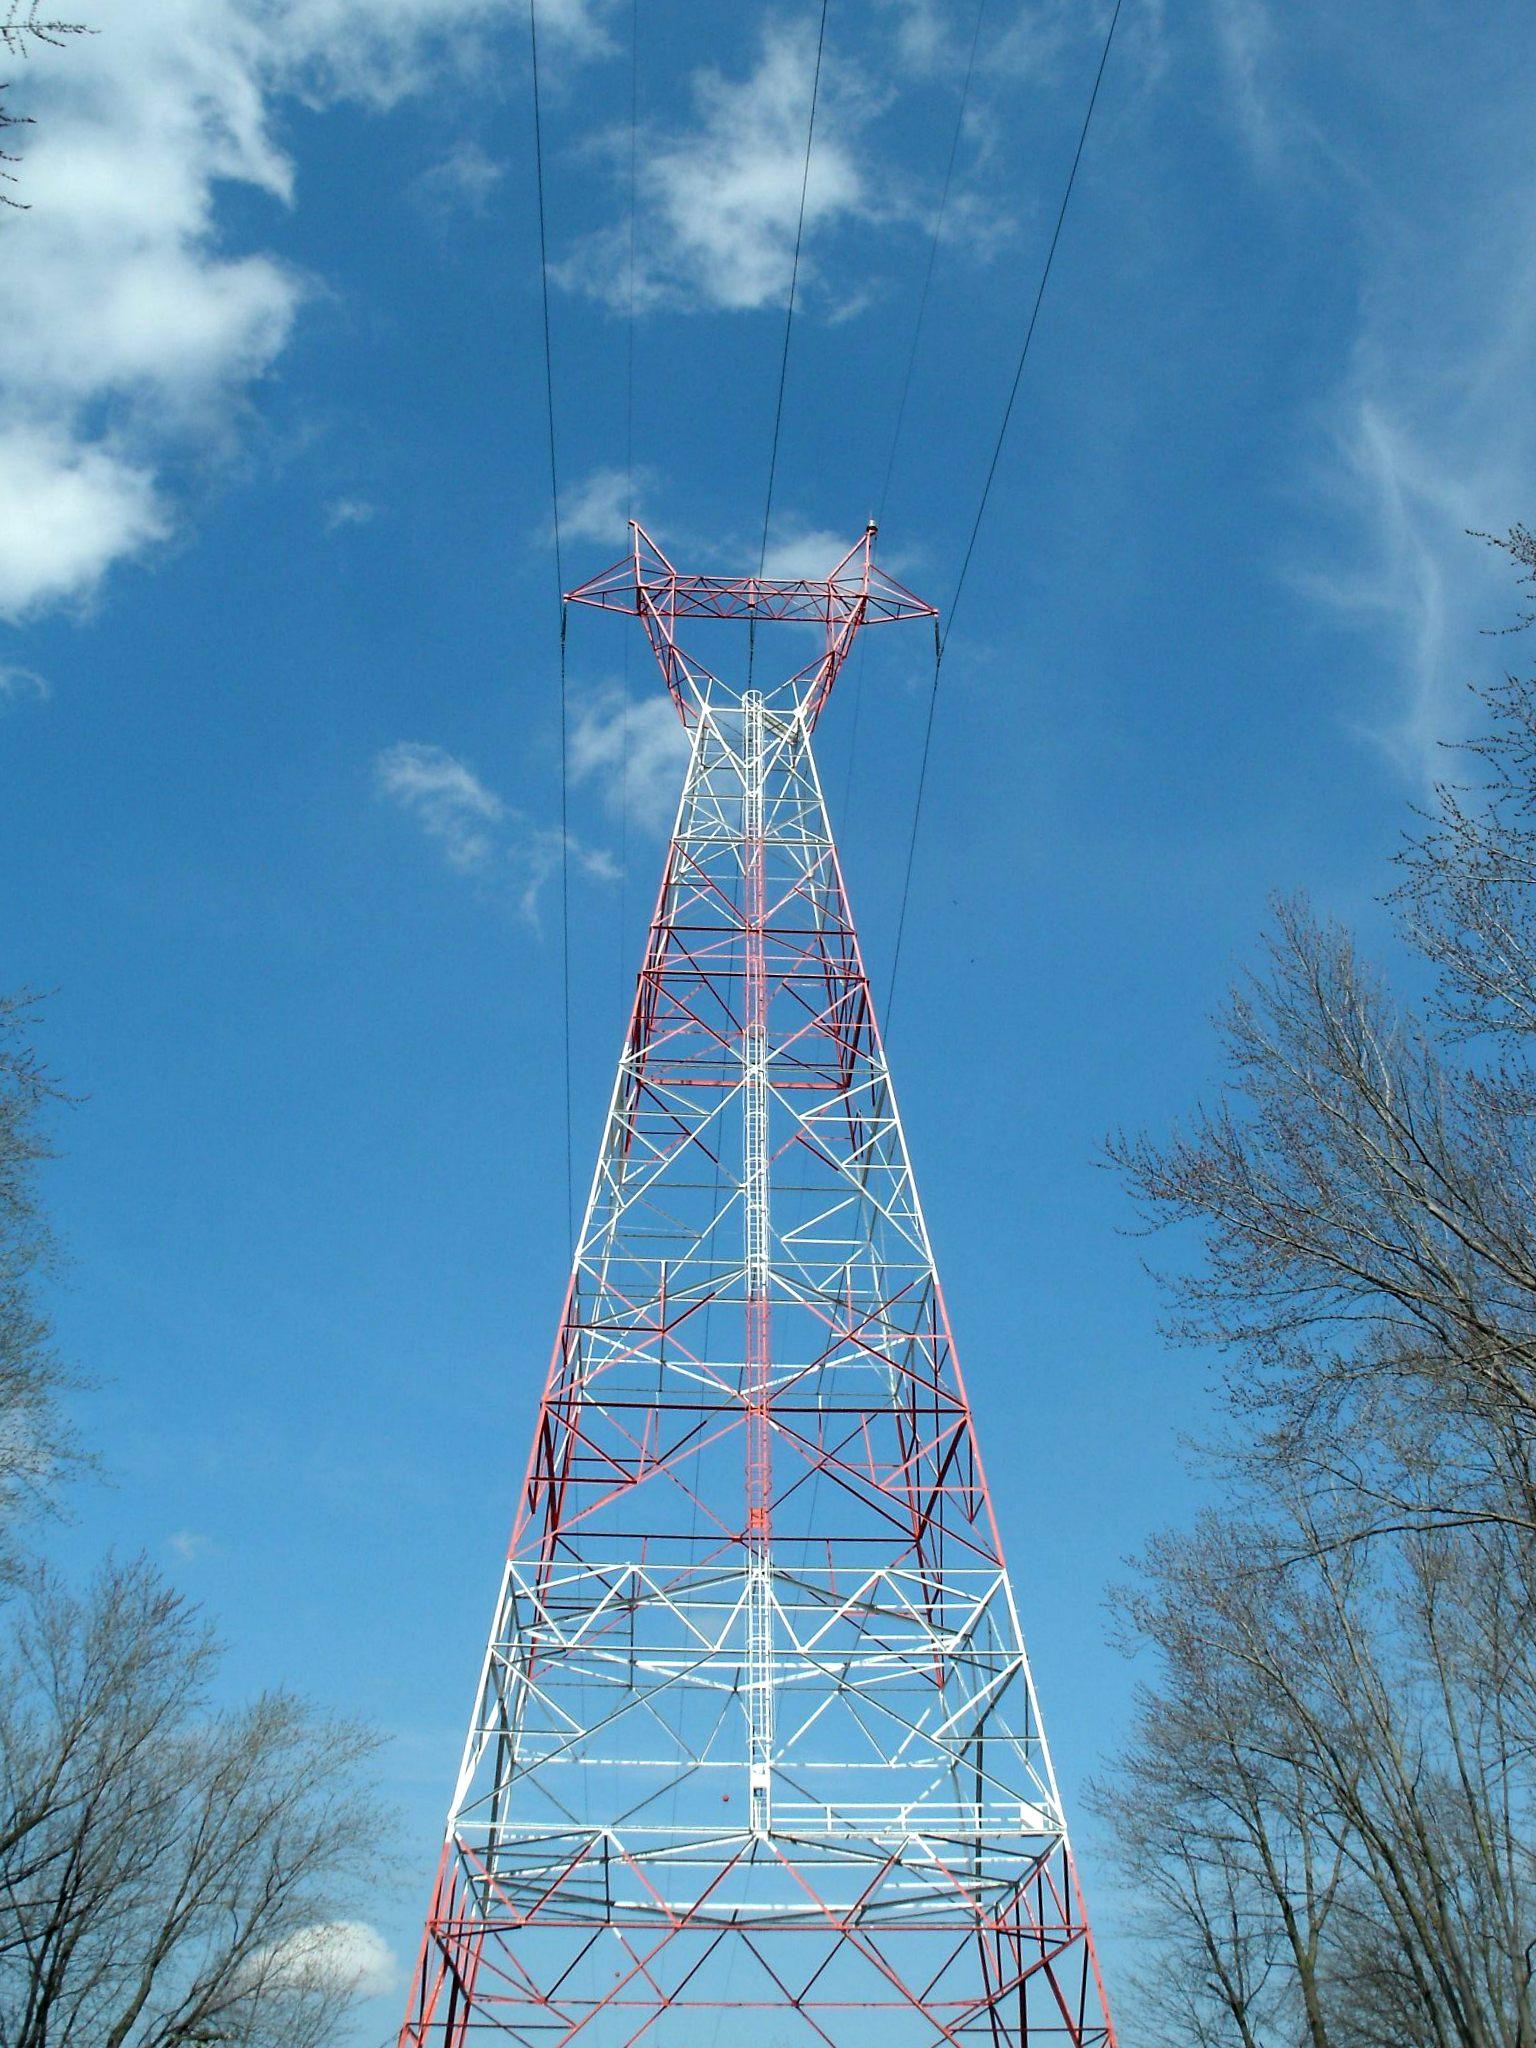 Updates from IL & IA on a Transmission Line Project WVIK